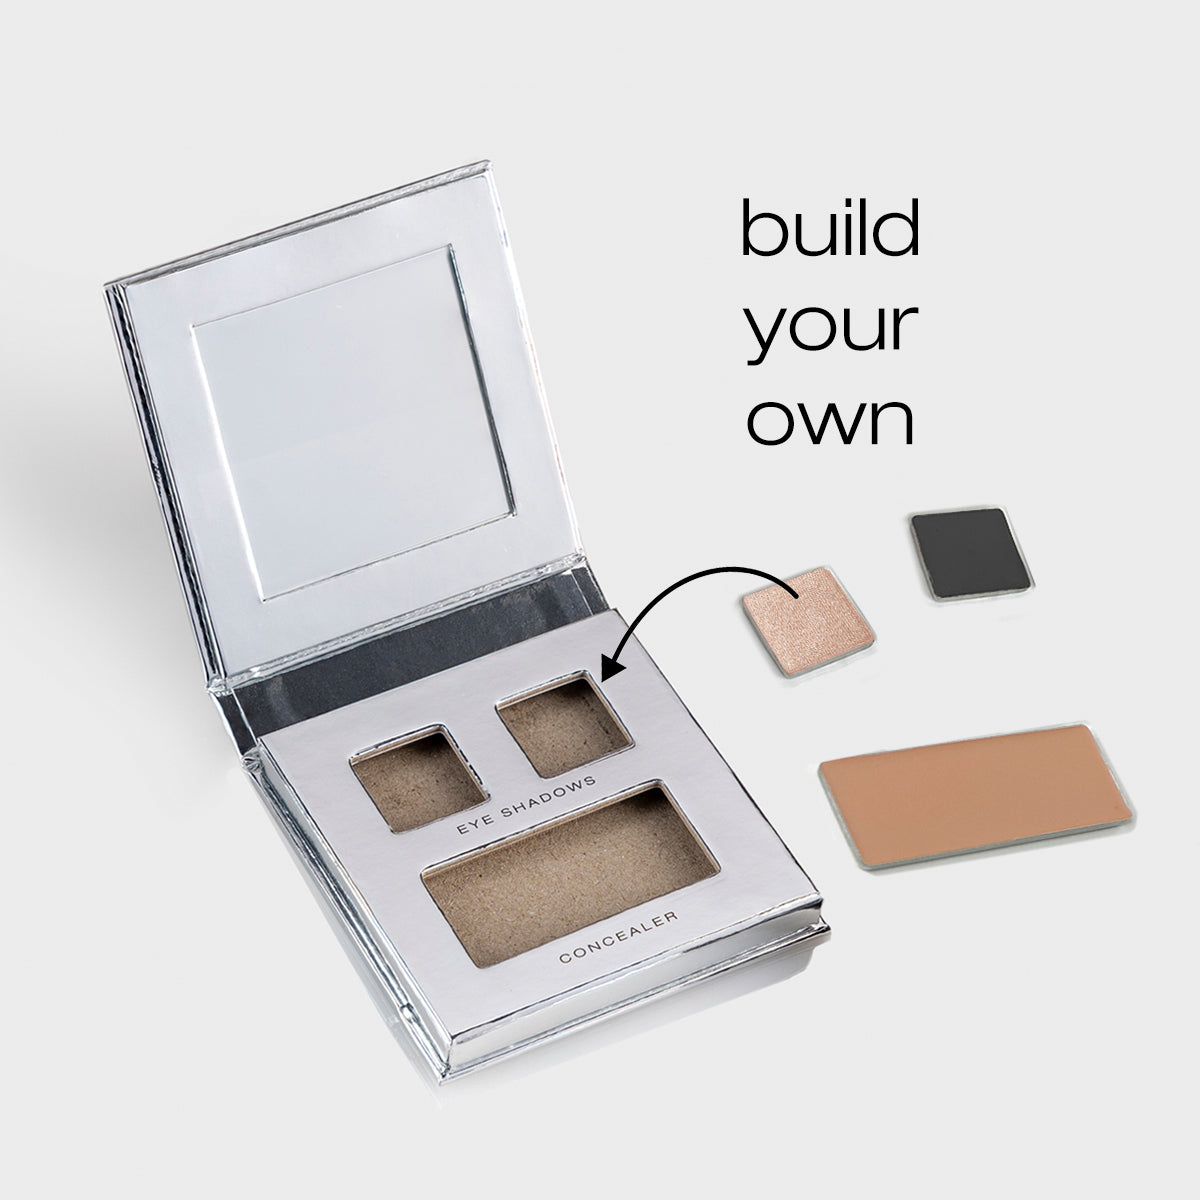 Empty palette with 3 pans showing you can build your own palette